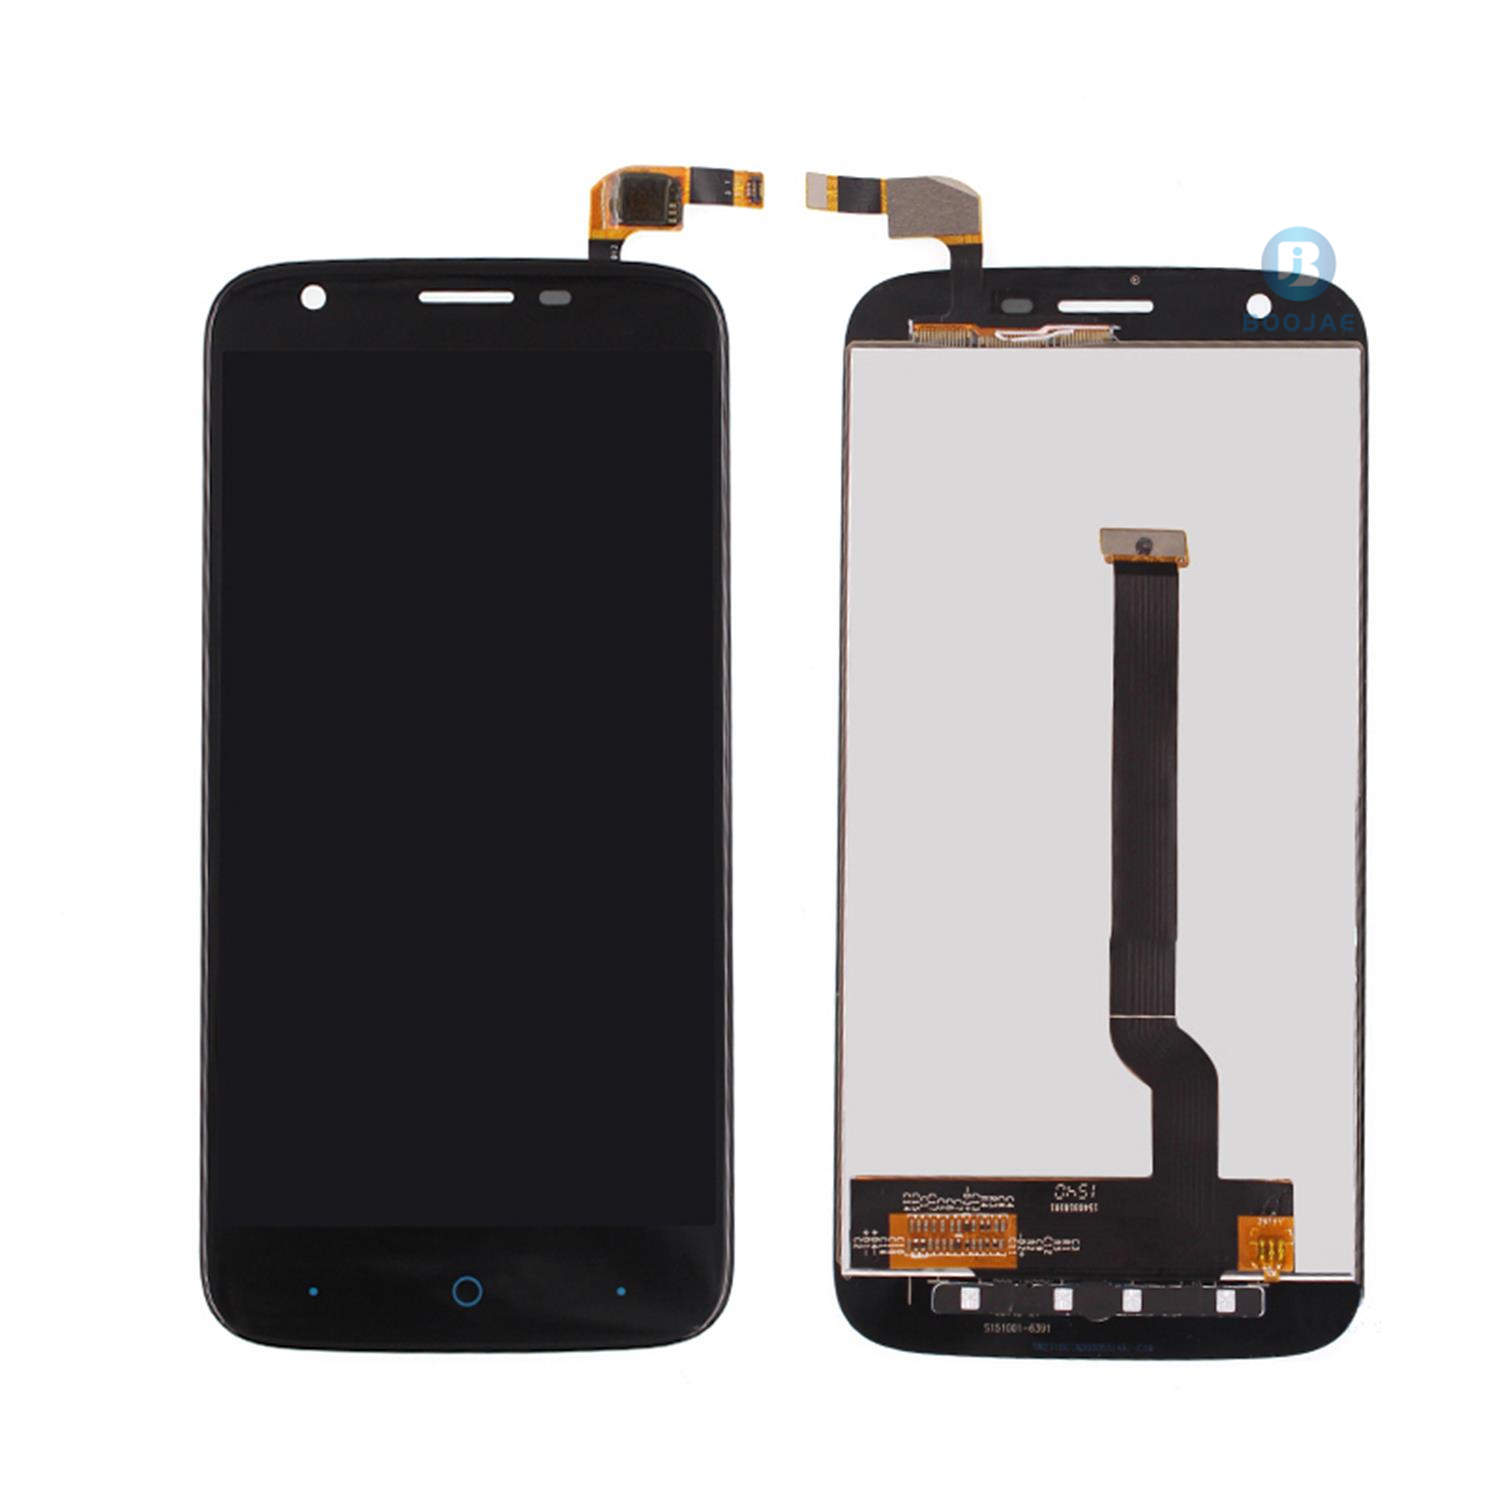 ZTE Z959 LCD Screen Display, Lcd Assembly Replacement